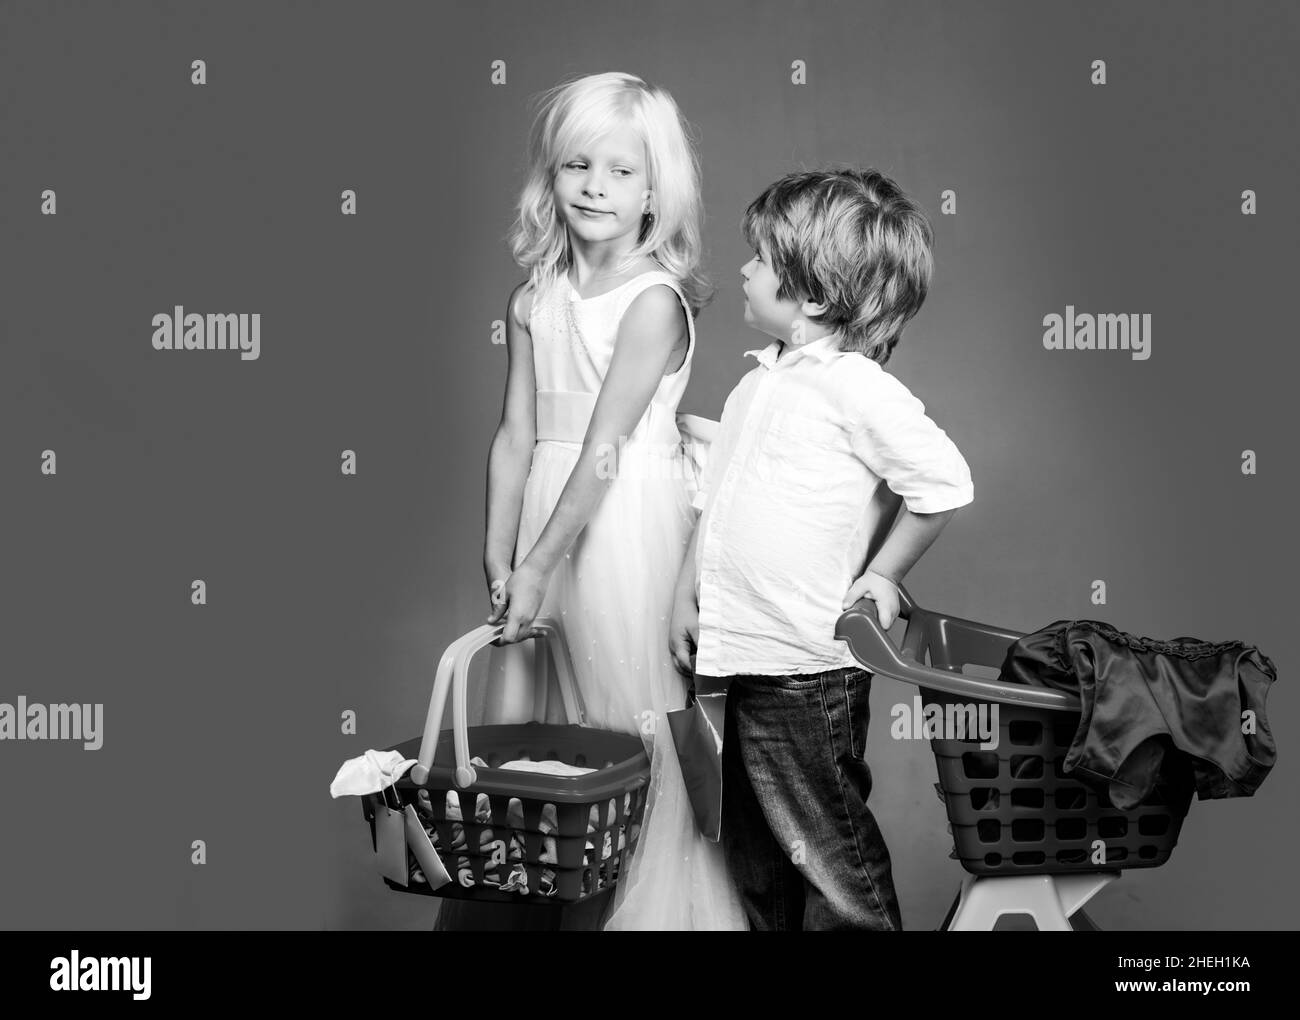 Cute buyer customer client hold shopping cart. Girl and boy children shopping. Couple kids hold plastic shopping basket toy. Kids store. Mall shopping Stock Photo